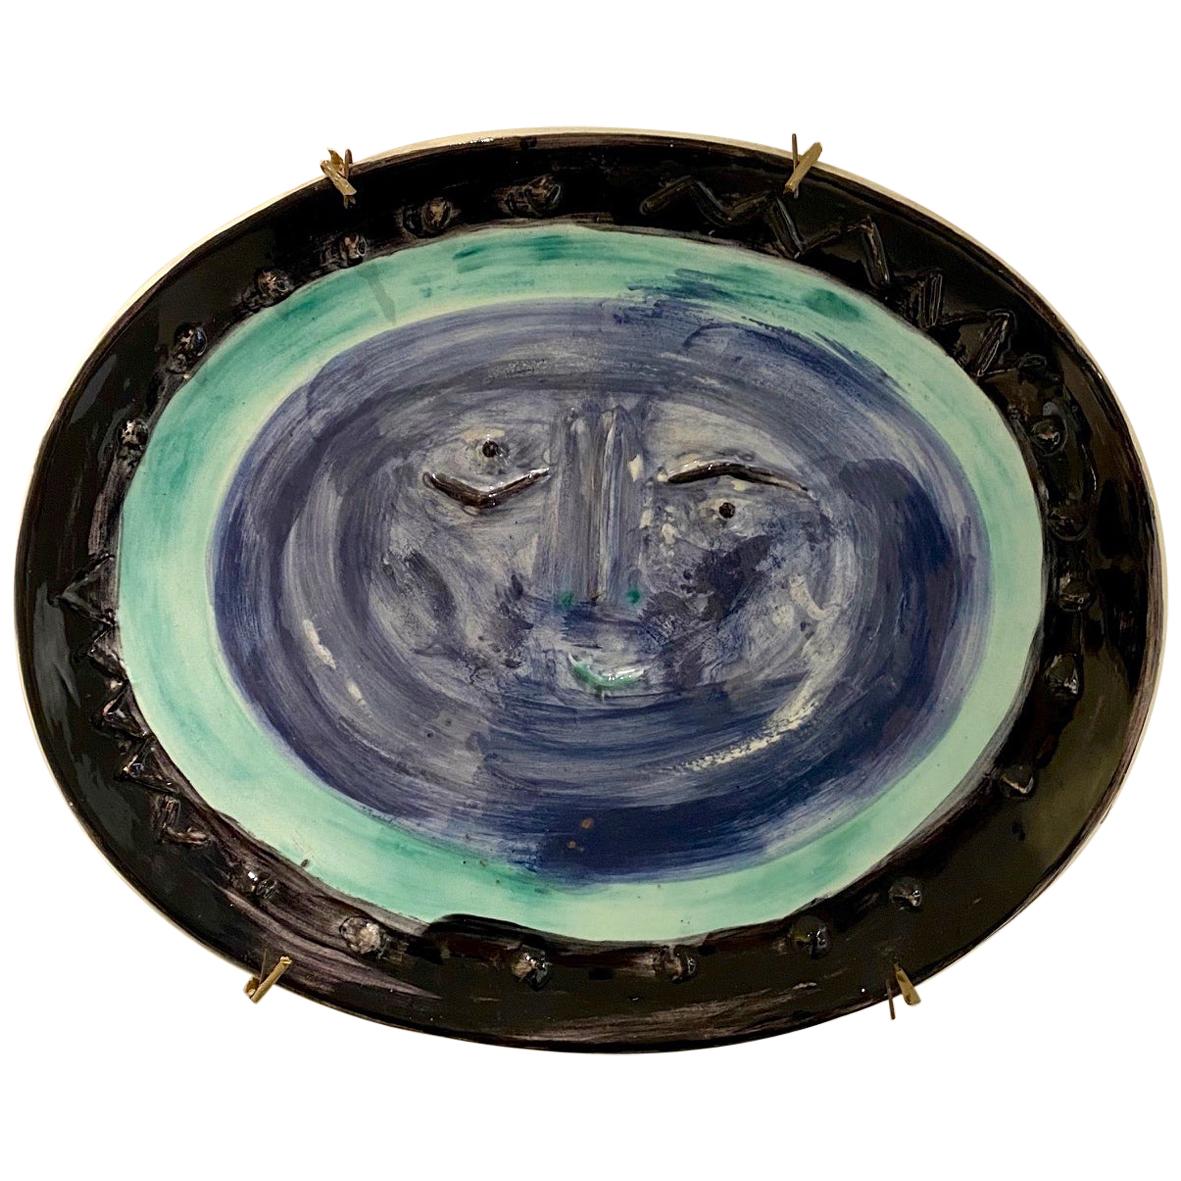 Picasso Edition Madoura Ceramic Dish "Face in an oval", 1955